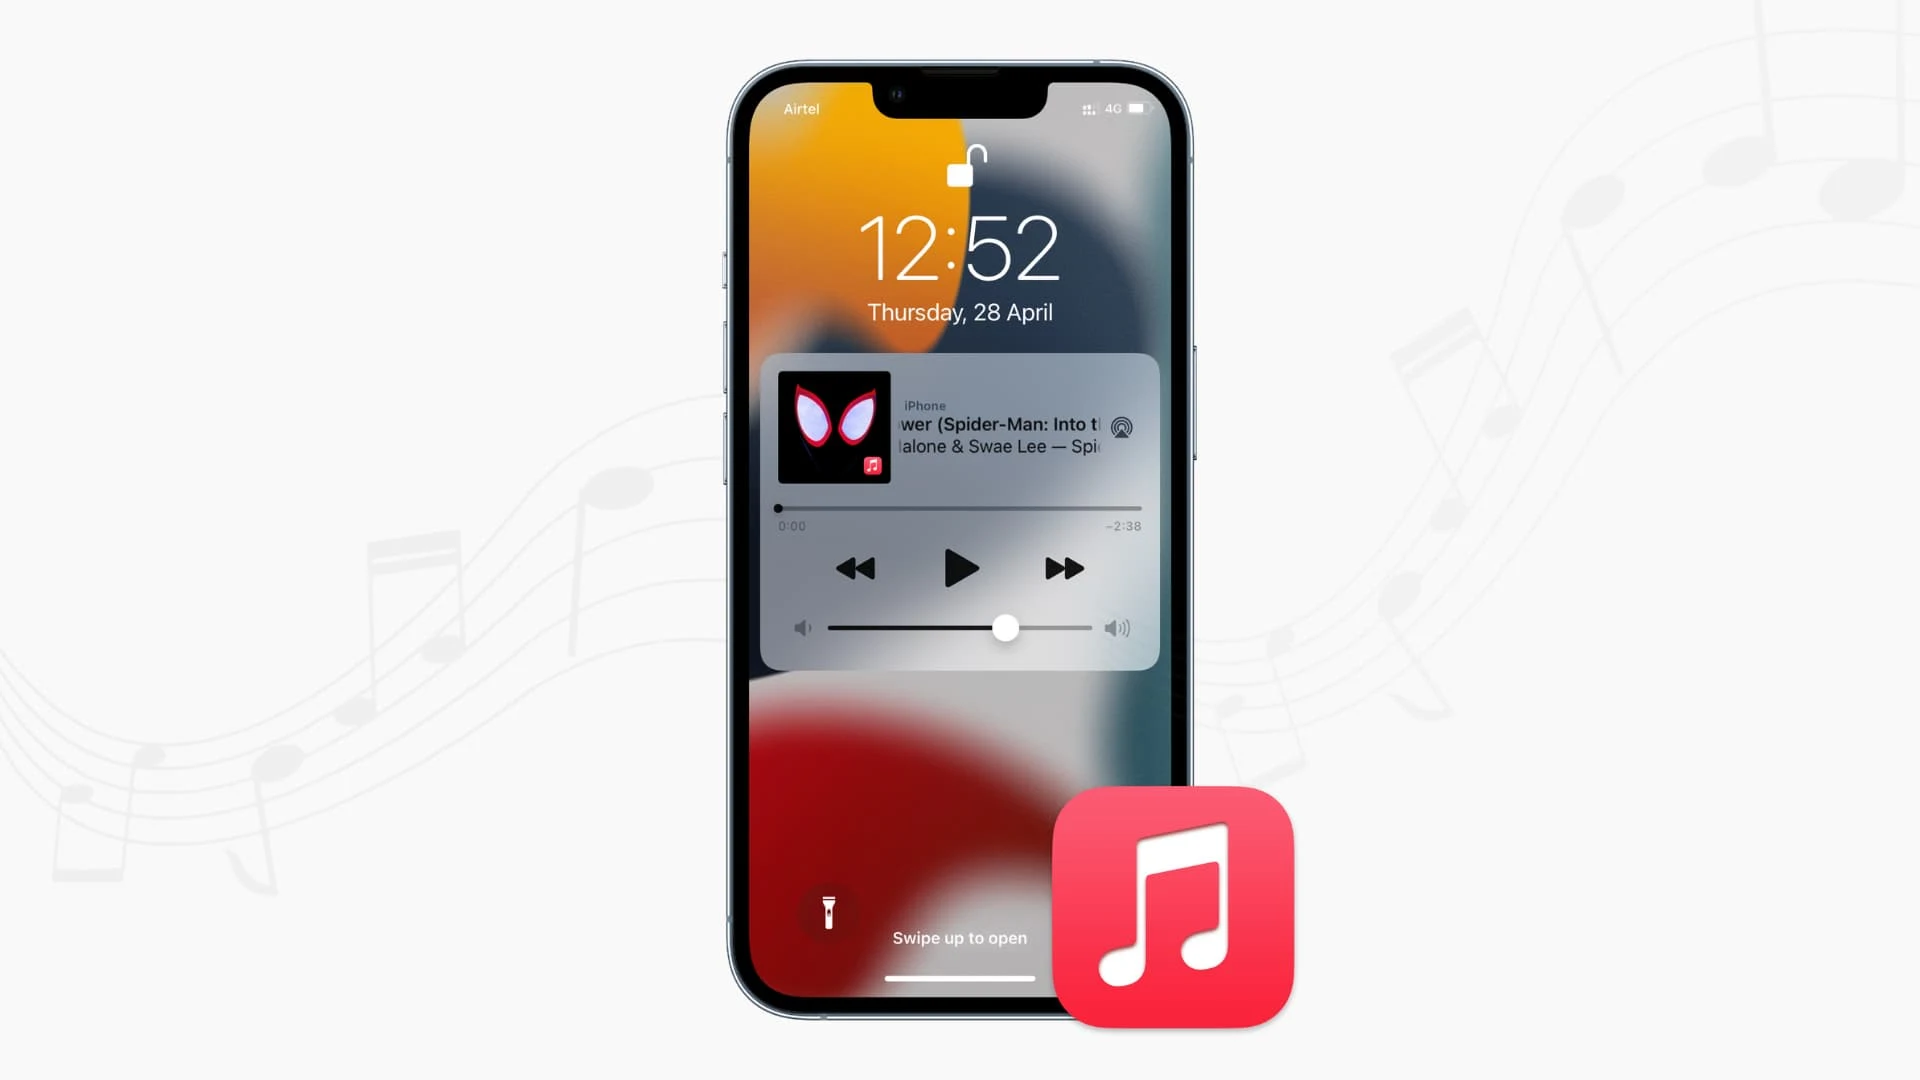 iPhone playing music by itself